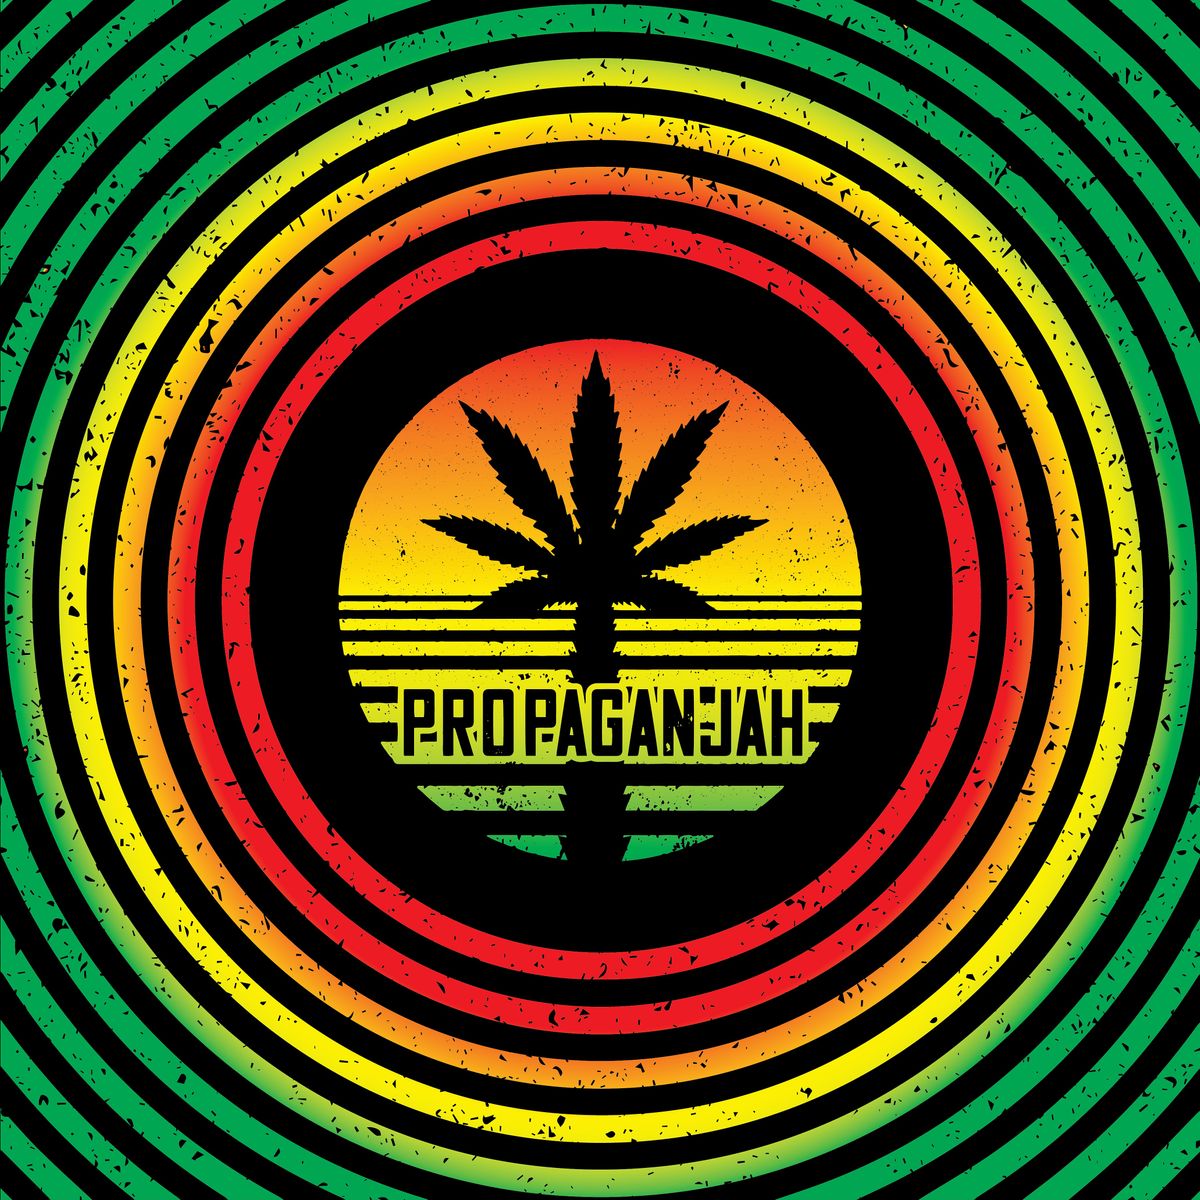 Propaganjah, The Dub Collectors, and The Intracostals in Tampa